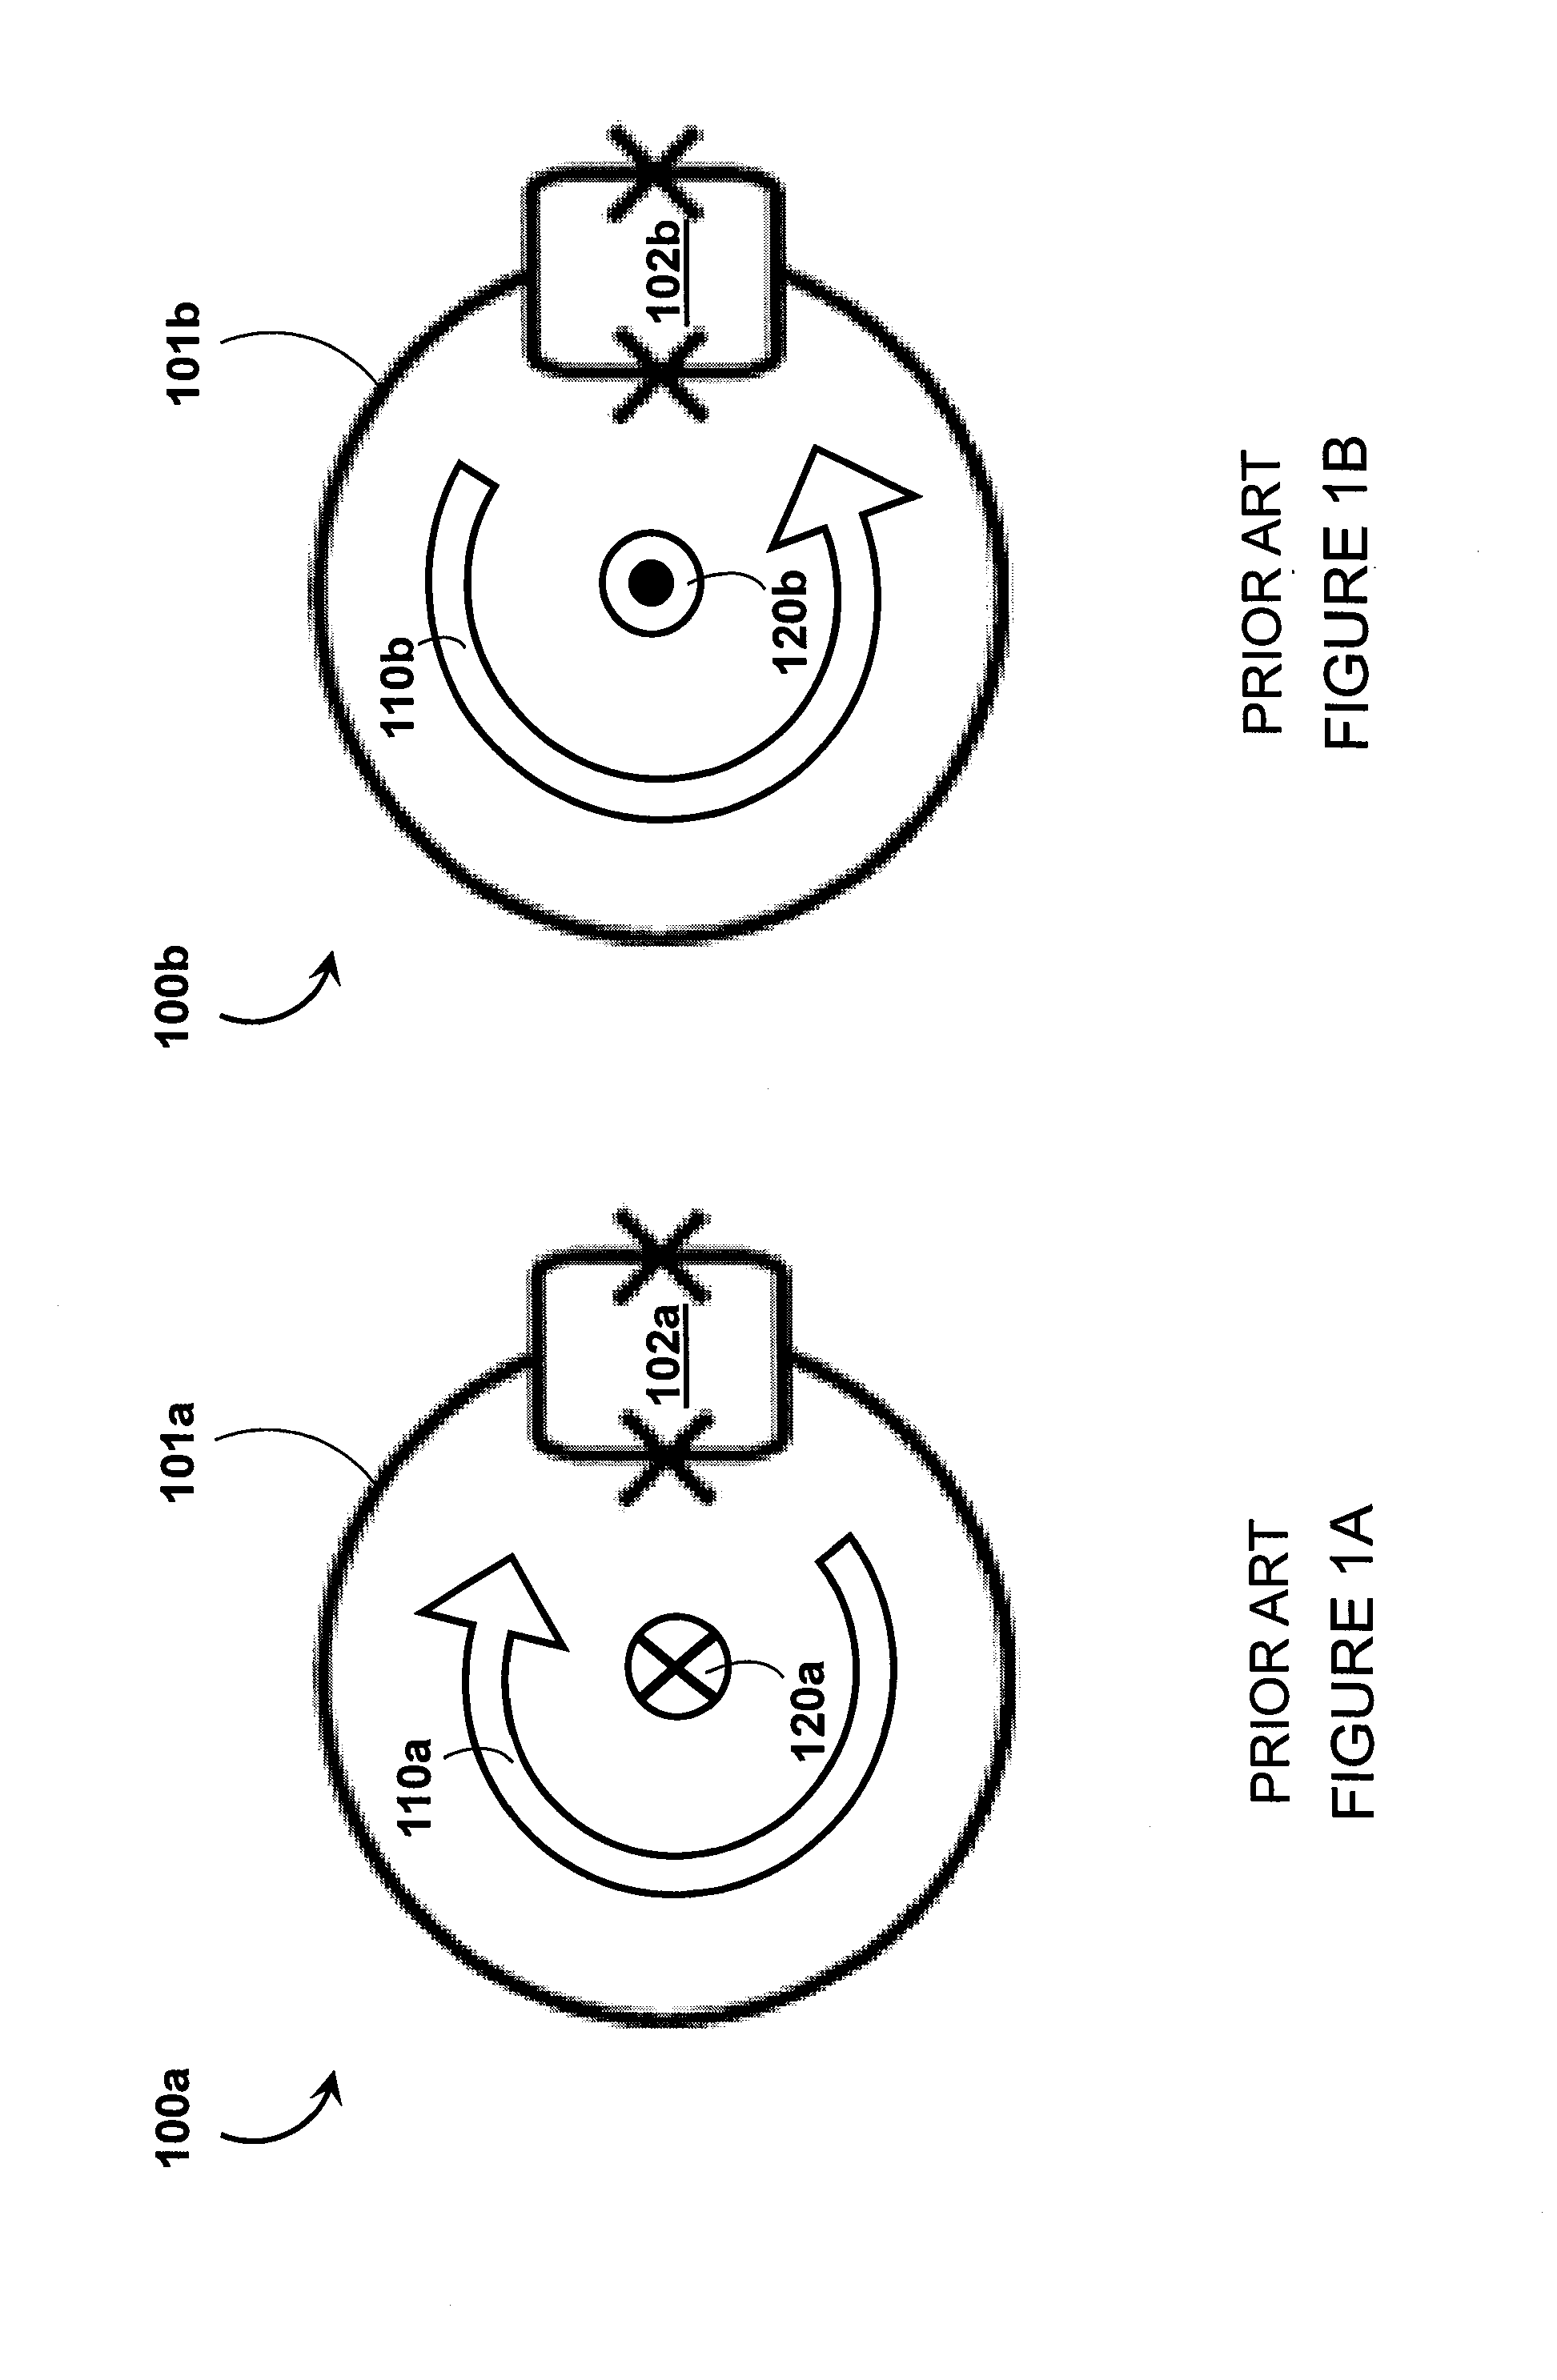 Systems and methods for superconducting flux qubit readout